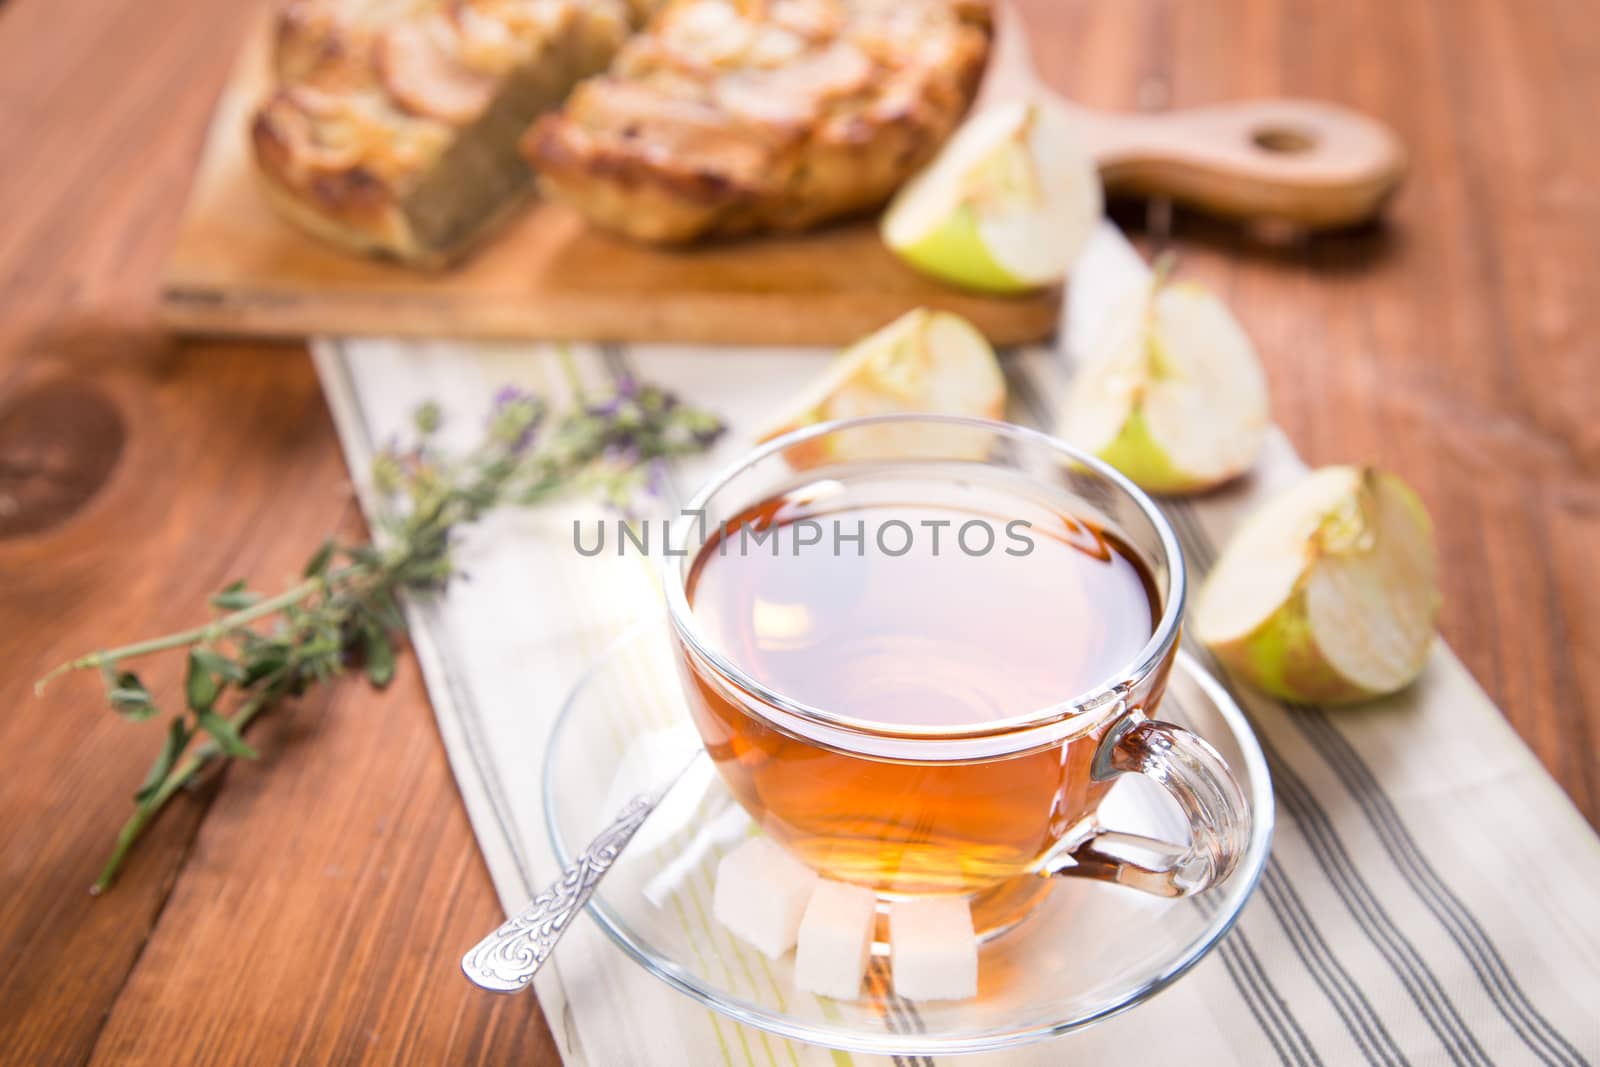 apple pie, with an cut piece and cup of tea